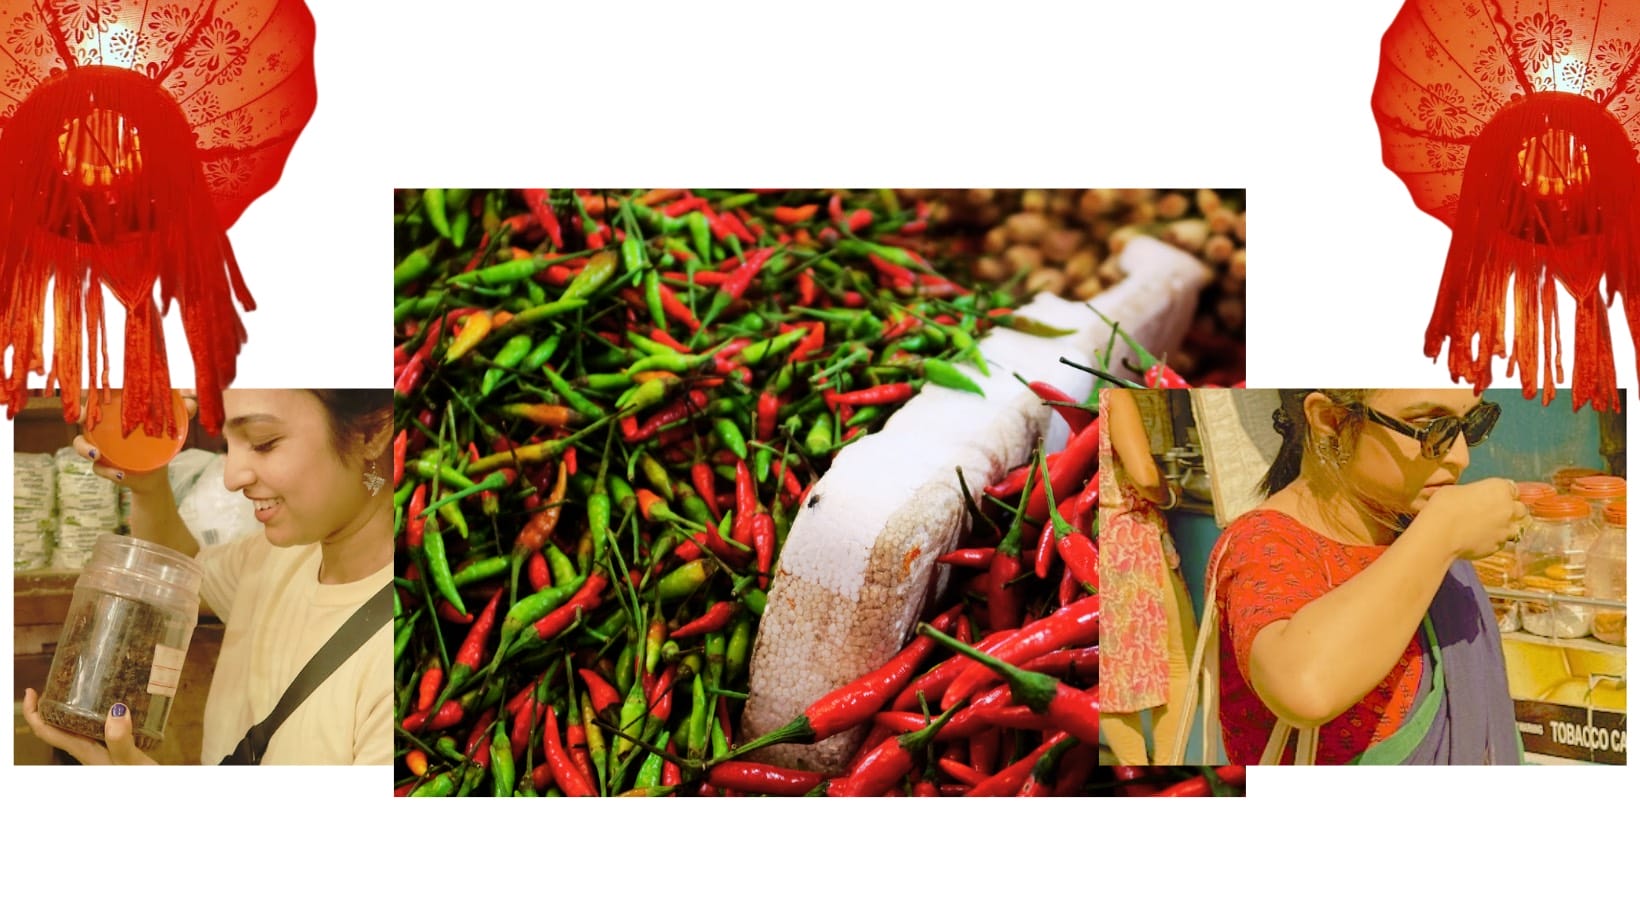 A collage of images. One photo in the middle shows a pile of green and red chillis.